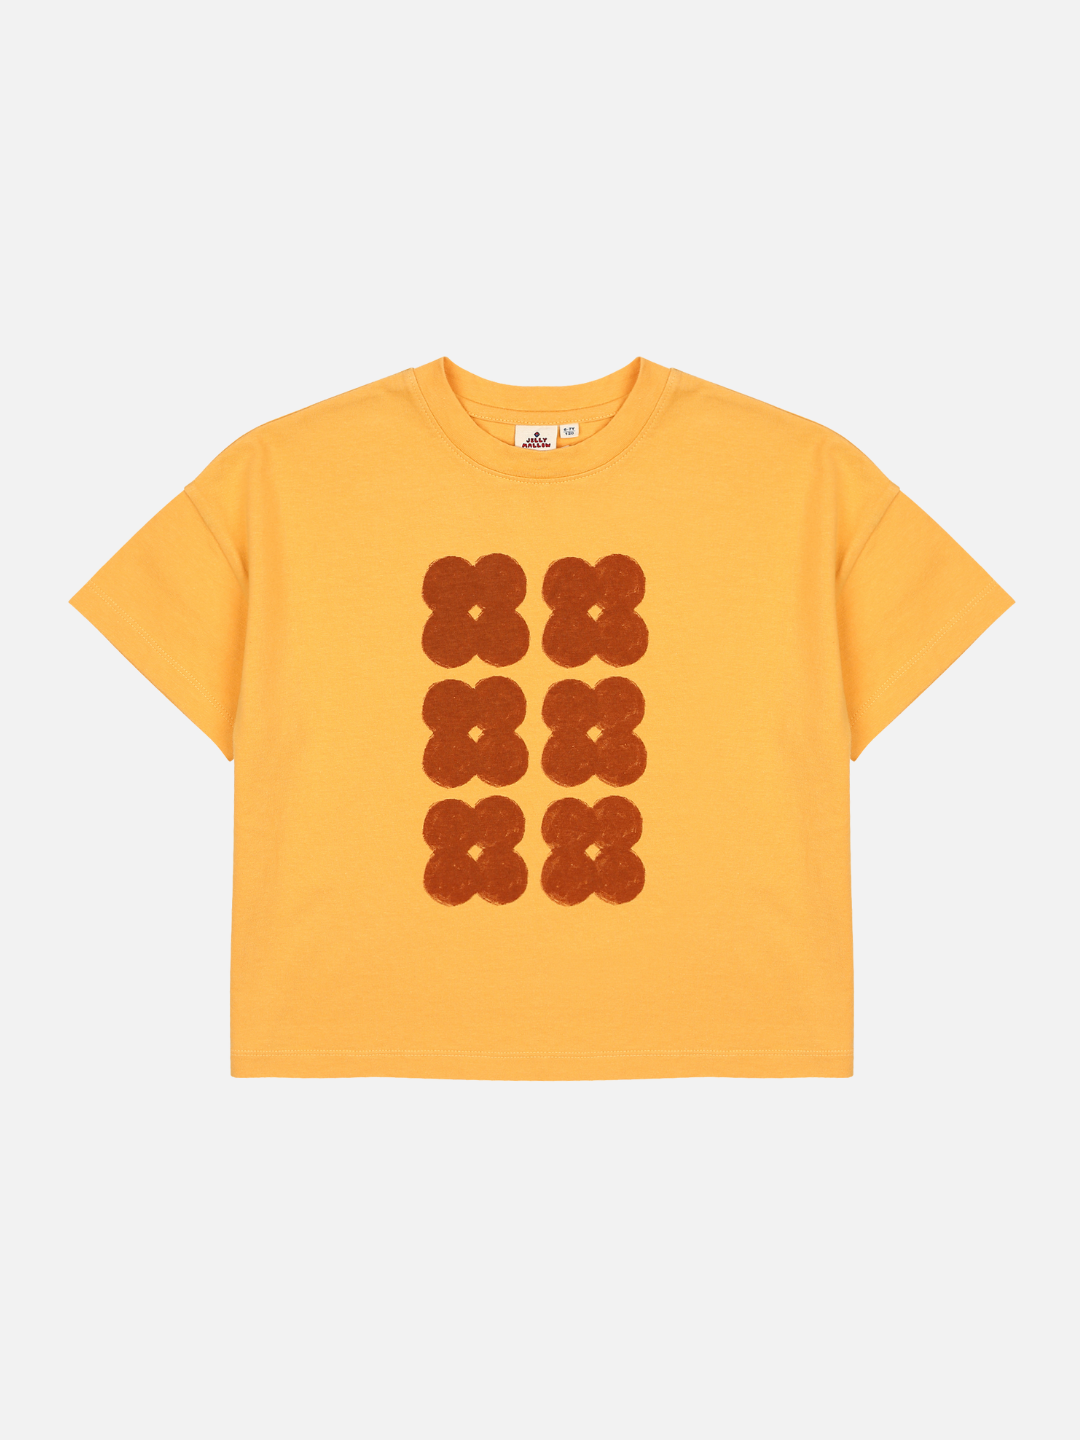 Yellow | Front of T-shirt with six dark orange clover shapes in two vertical rows on a yellow background.